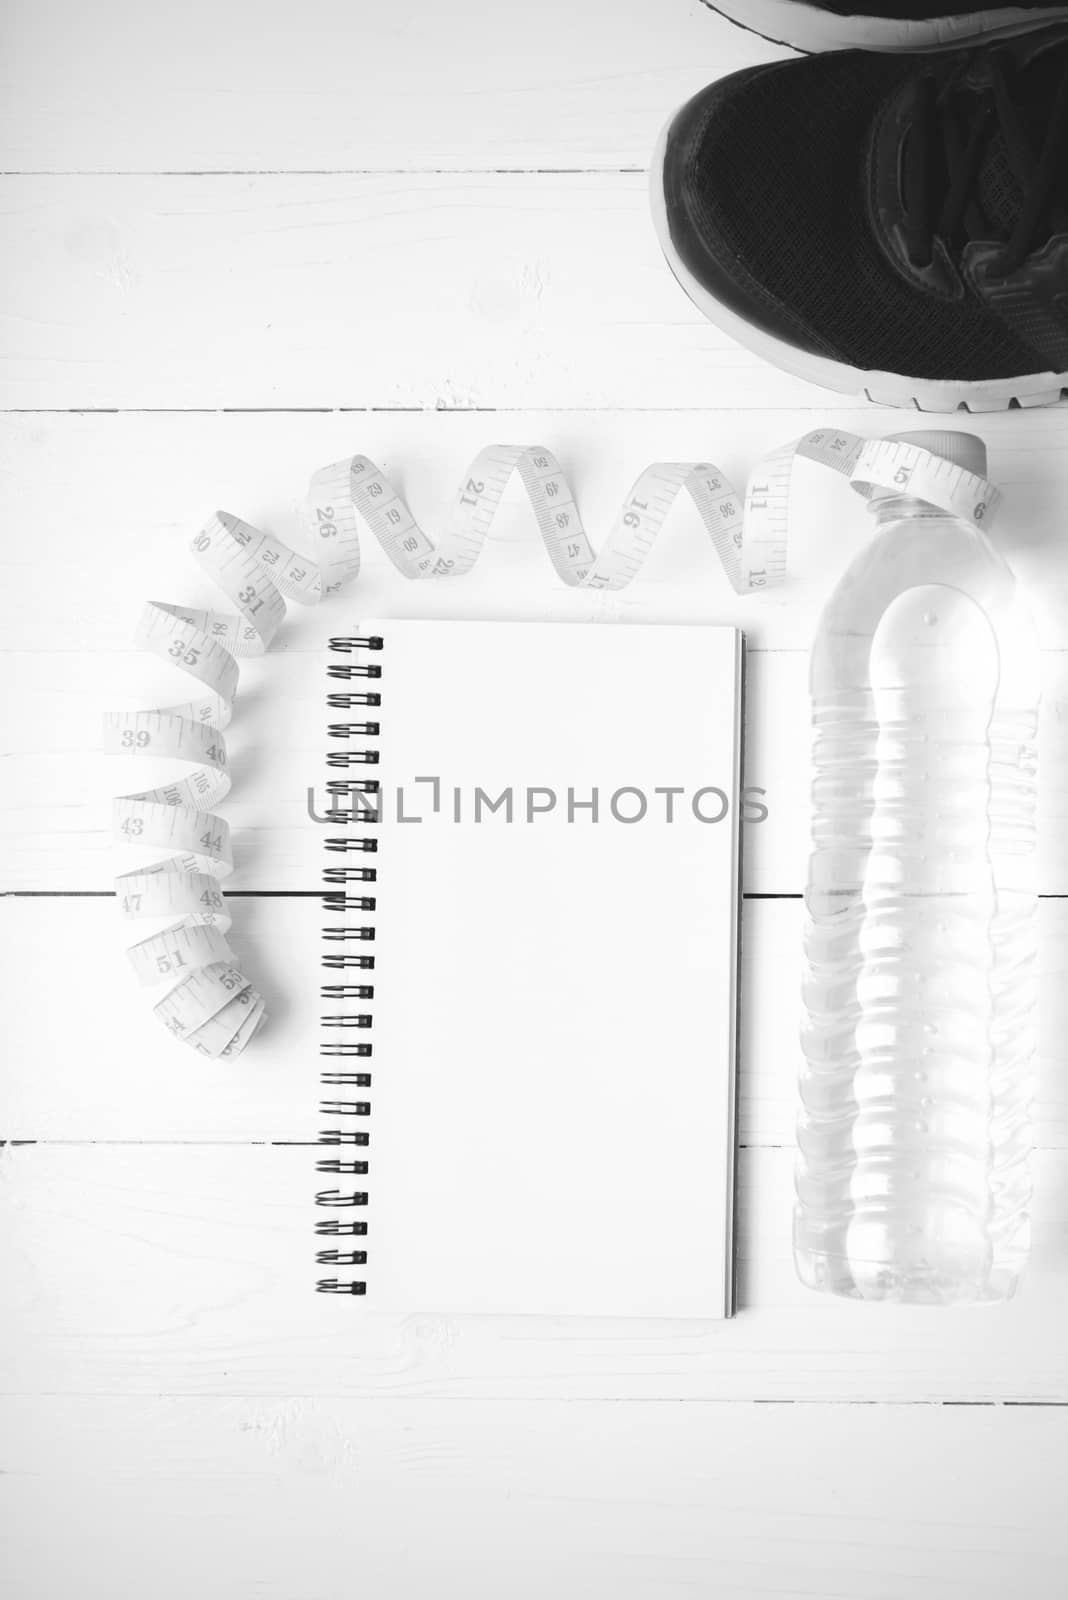 running shoes,measuring tape,drinking water and notebook on white wood table black and white tone color style